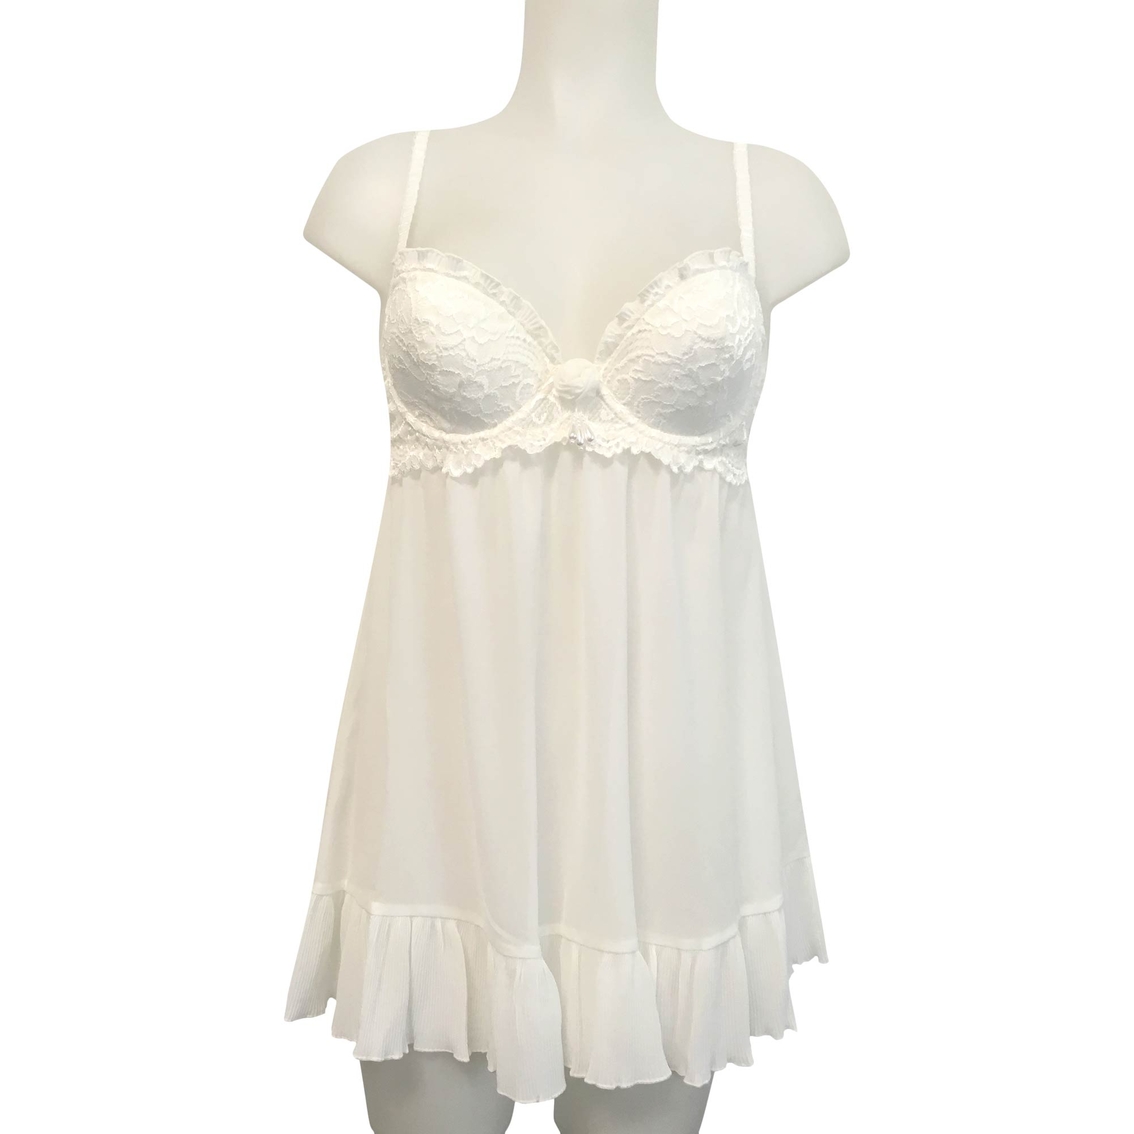 Cinema Etoile Sequin And Lace Molded Cup Babydoll | Lingerie | Clothing ...